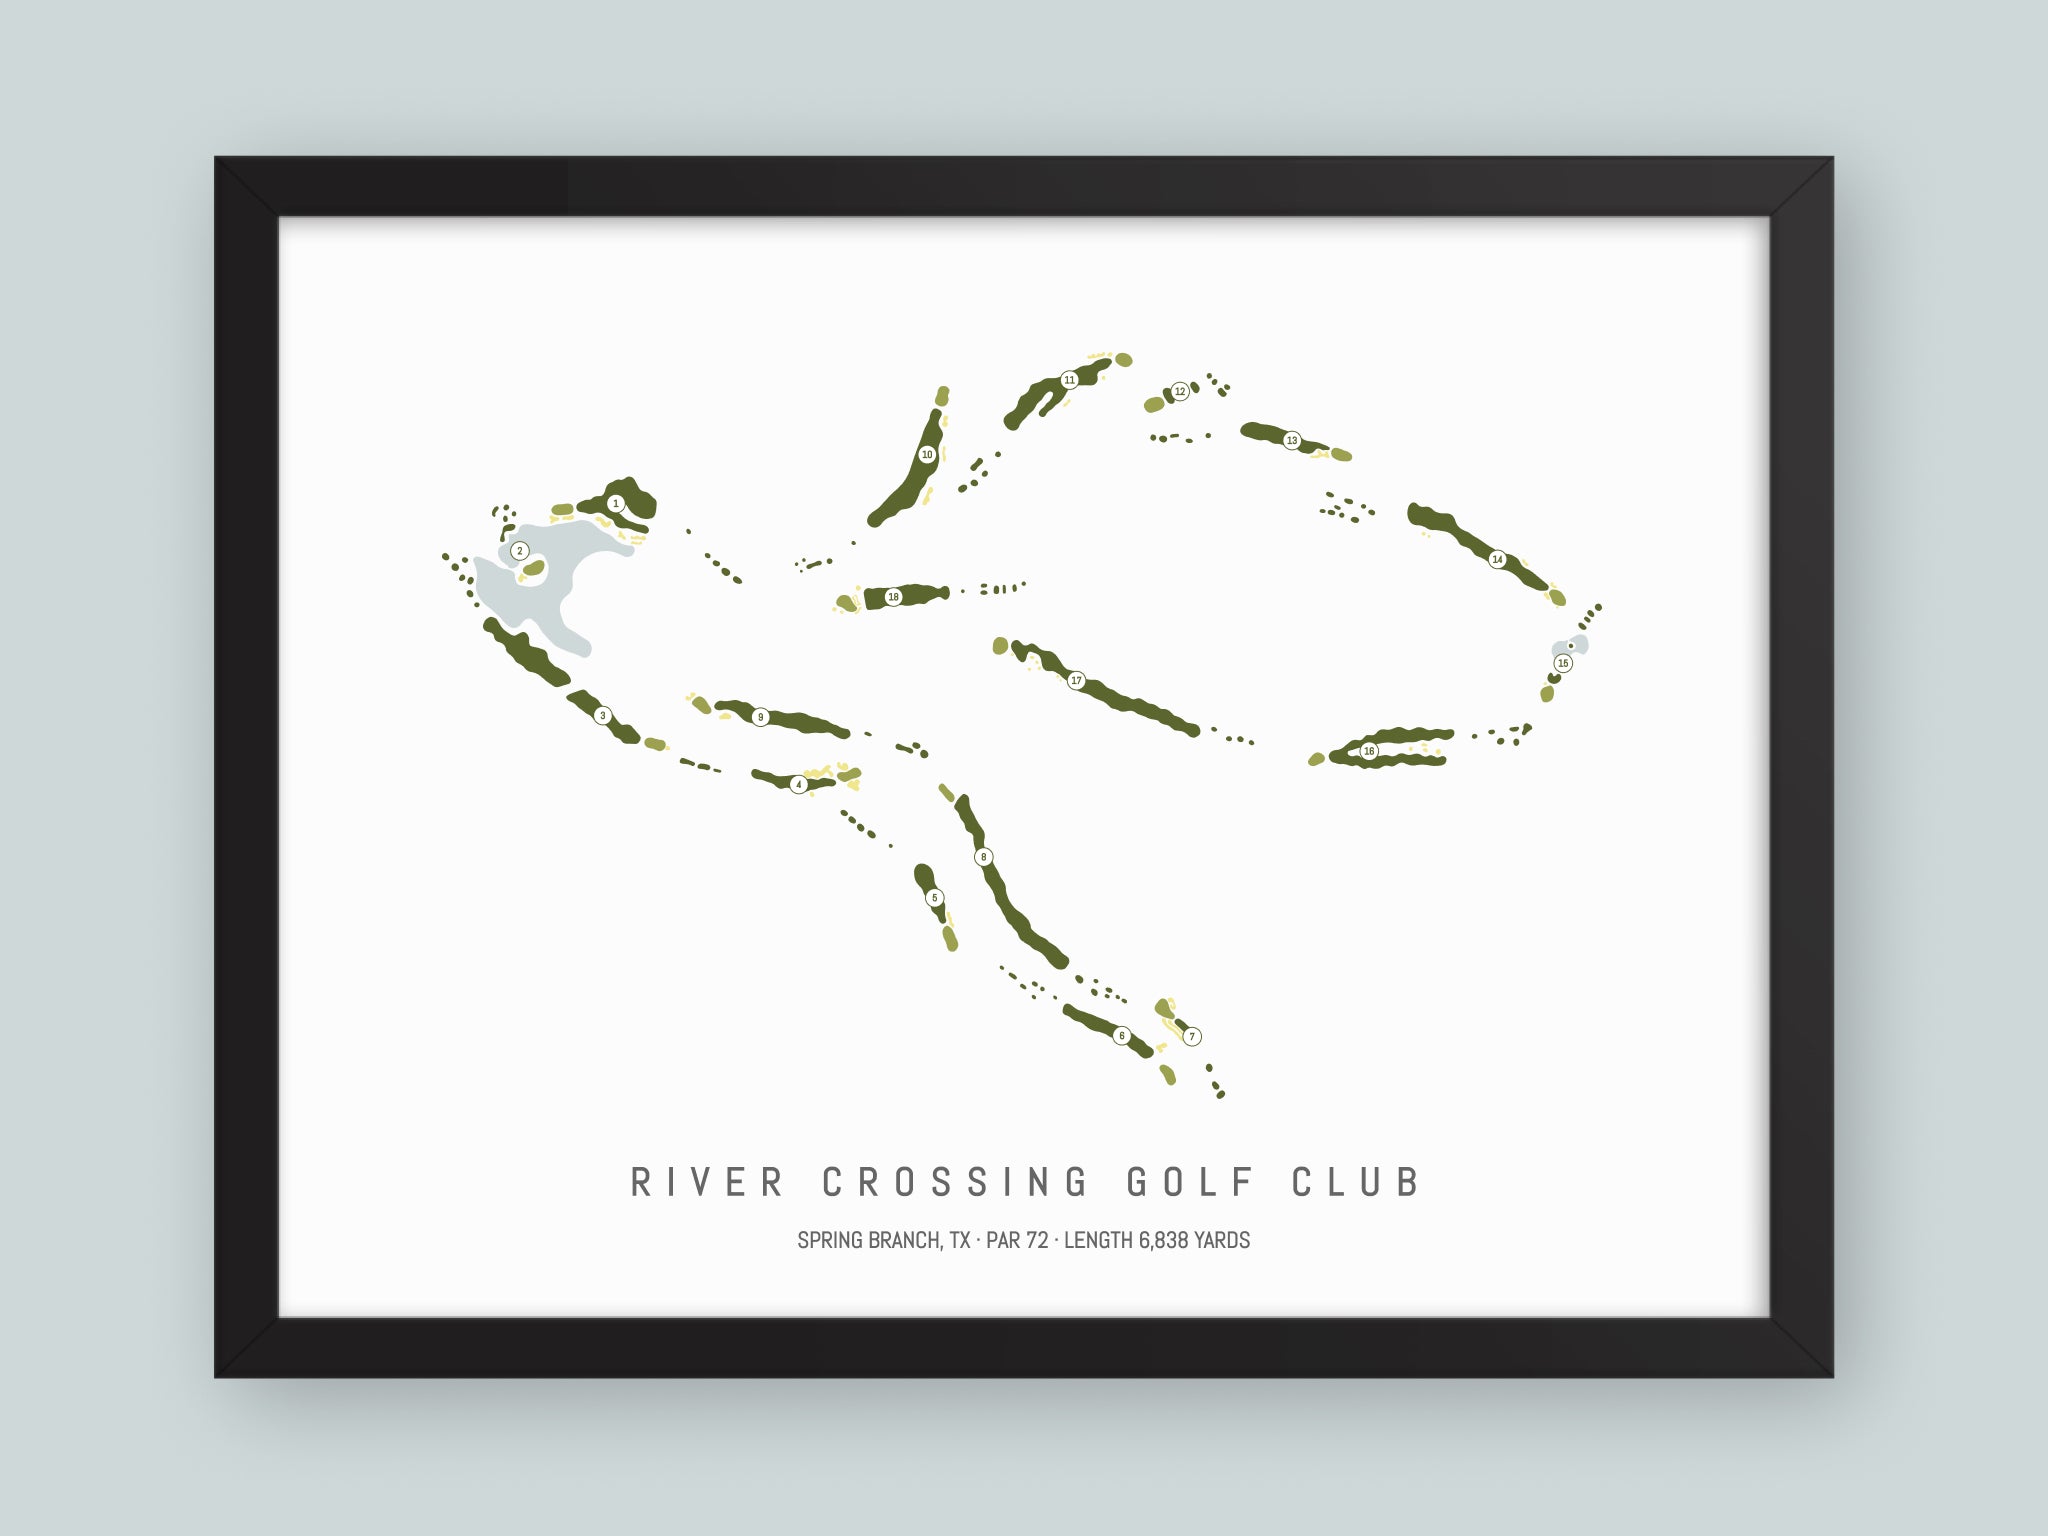 River-Crossing-Golf-Club-TX--Black-Frame-24x18-With-Hole-Numbers